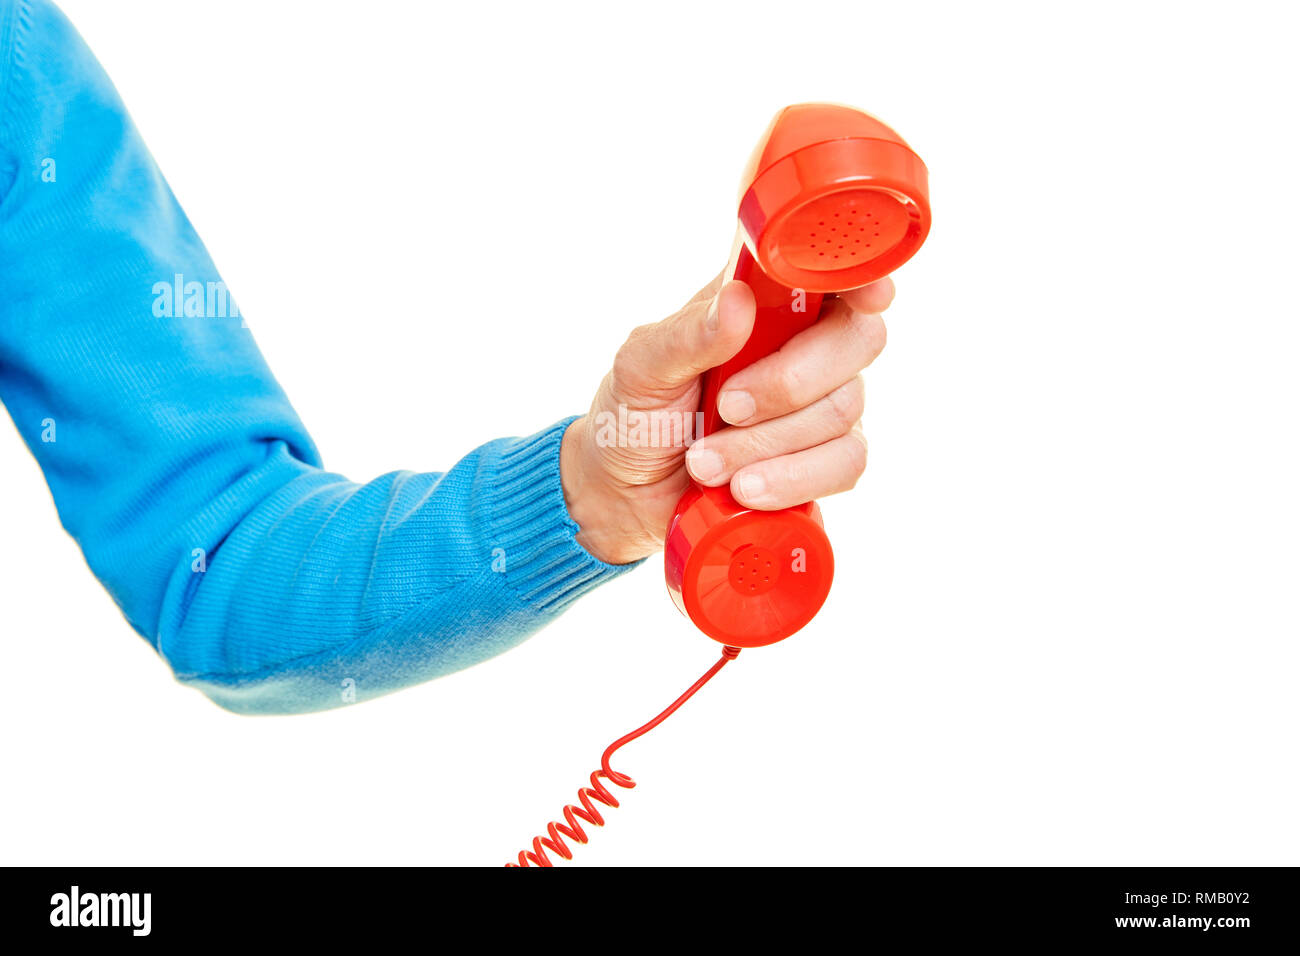 Male hand is holding a red phone as an emergency call concept Stock Photo